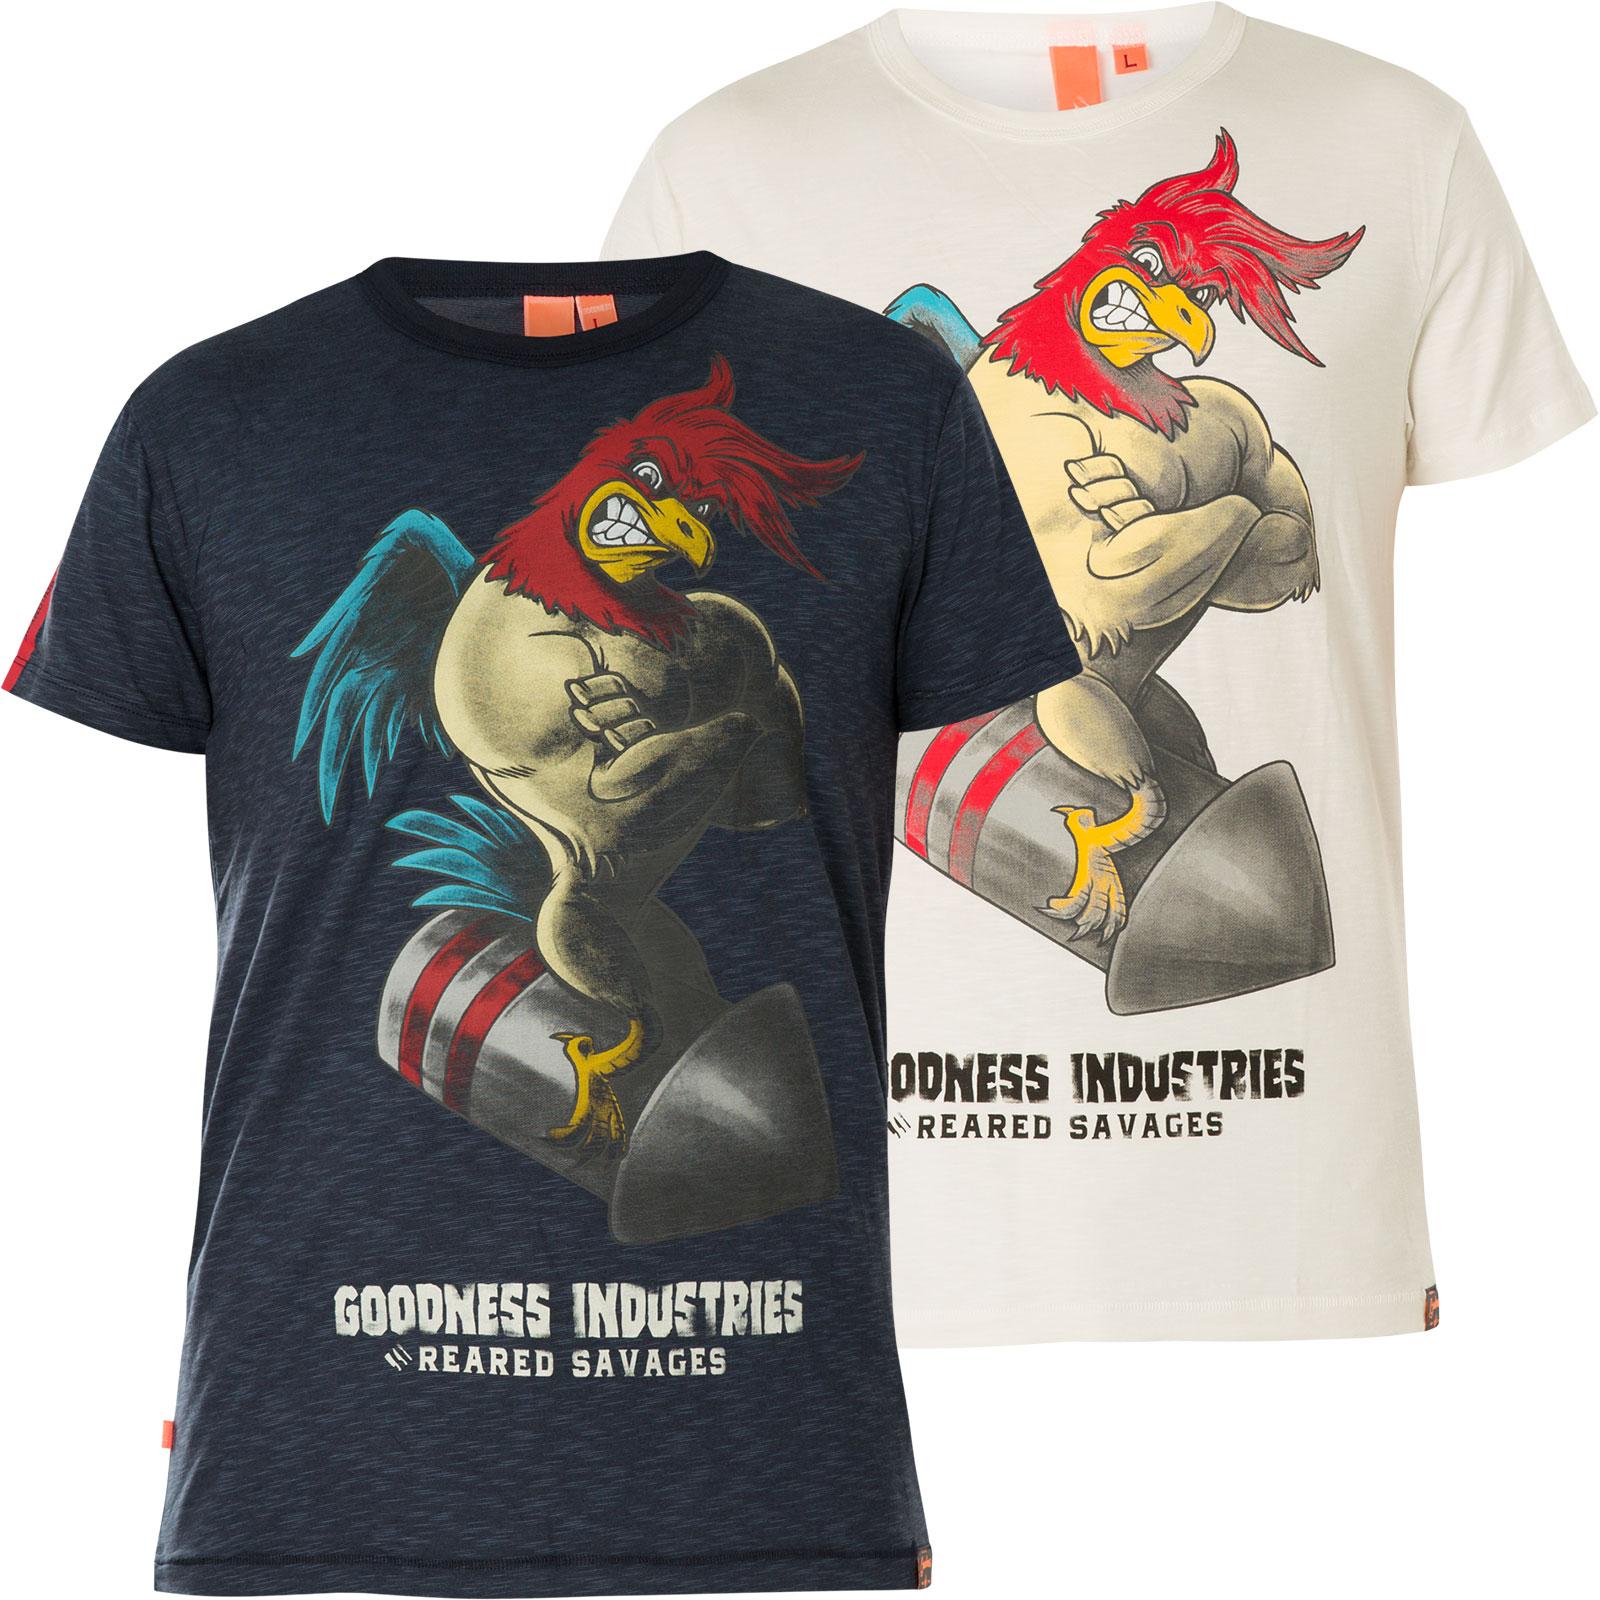 Goodness Industries T Shirt Gn 542 With Cocks Print